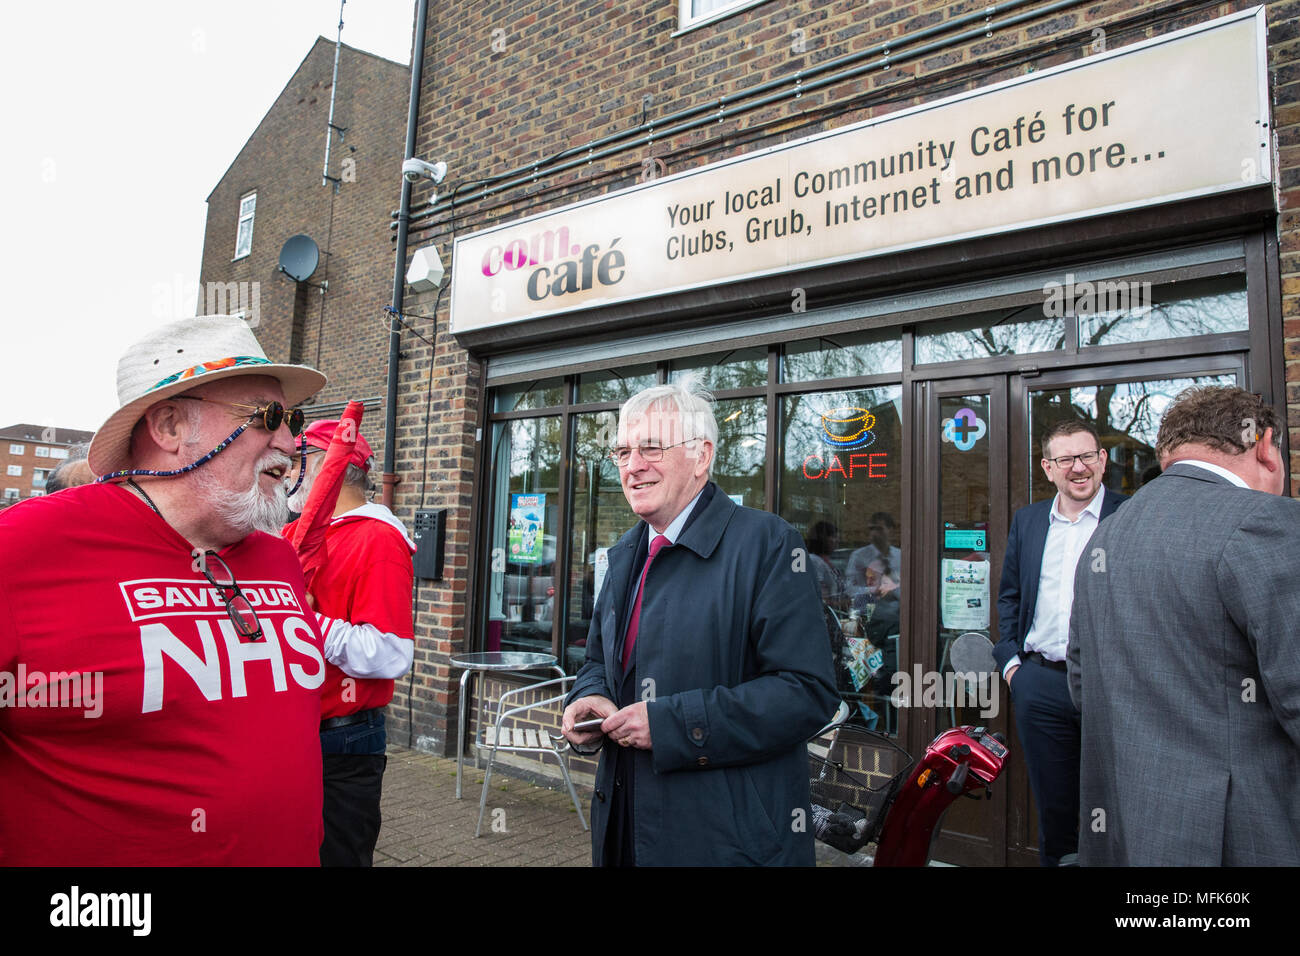 West Drayton, UK. 26th April, 2018. Shadow Chancellor John McDonnell and Shadow Secretary of State for Communities and Local Government Andrew Gwynne take part in local election campaigning for the Labour Party in Hillingdon. Credit: Mark Kerrison/Alamy Live News Stock Photo